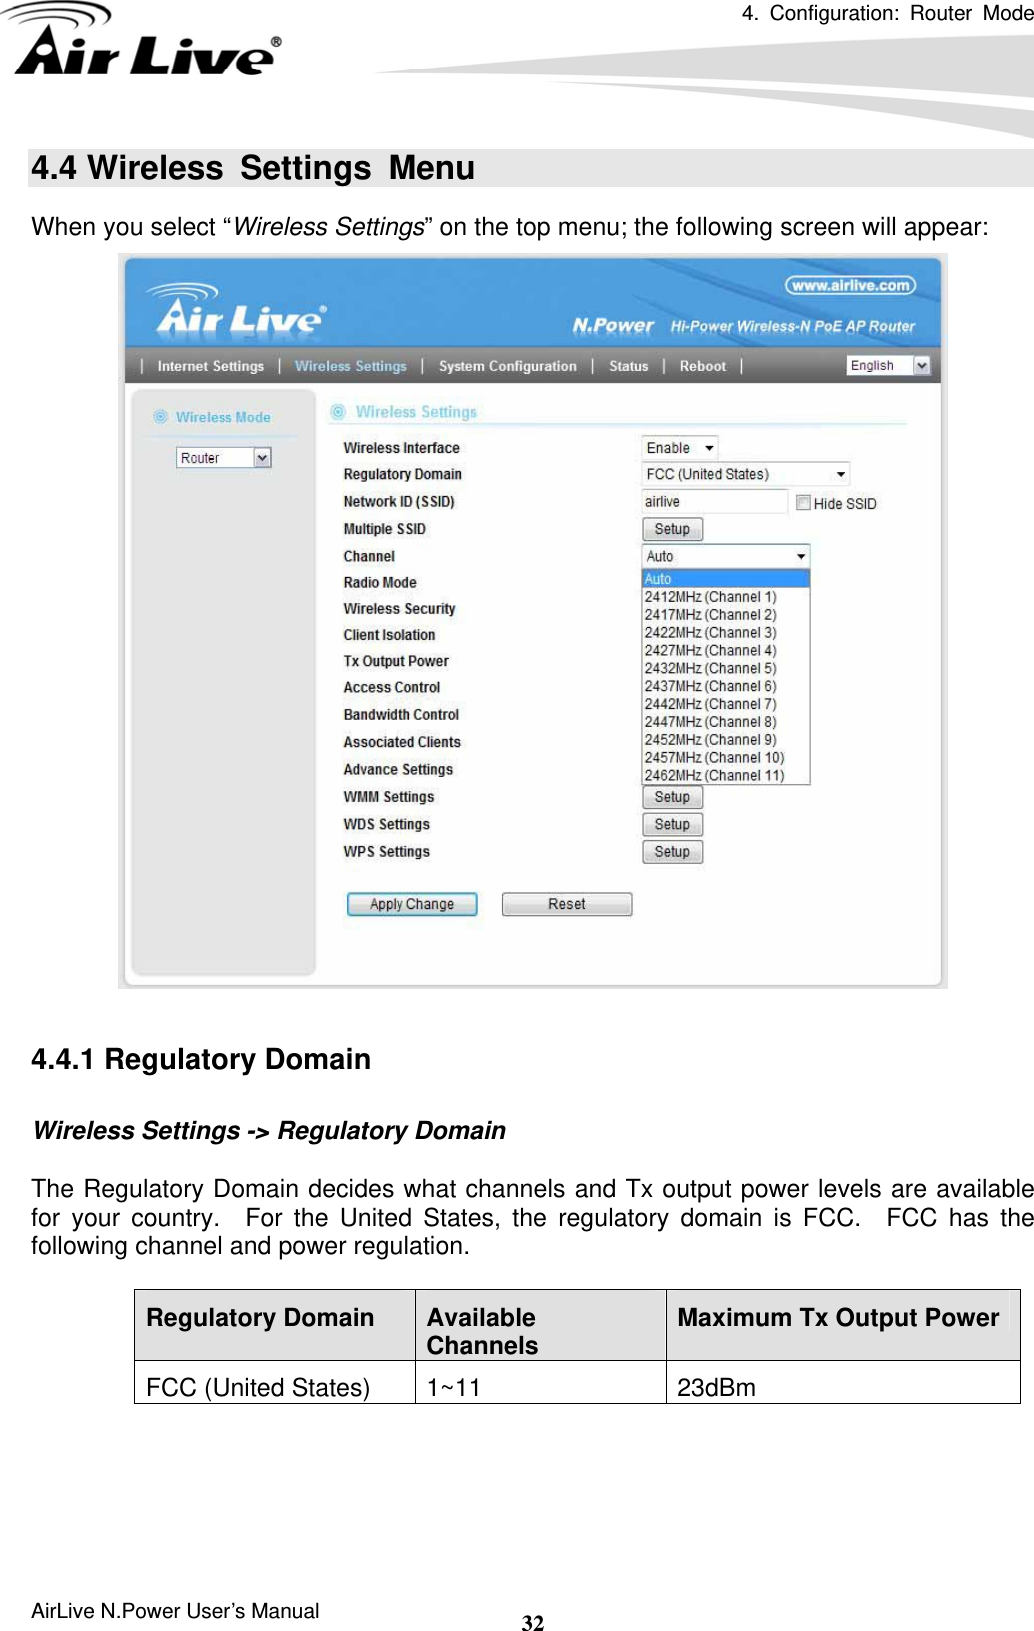 4. Configuration: Router Mode  AirLive N.Power User’s Manual  324.4 Wireless Settings Menu When you select “Wireless Settings” on the top menu; the following screen will appear:   4.4.1 Regulatory Domain  Wireless Settings -&gt; Regulatory Domain  The Regulatory Domain decides what channels and Tx output power levels are available for your country.  For the United States, the regulatory domain is FCC.  FCC has the following channel and power regulation.    Regulatory Domain  Available Channels  Maximum Tx Output Power FCC (United States)  1~11  23dBm    